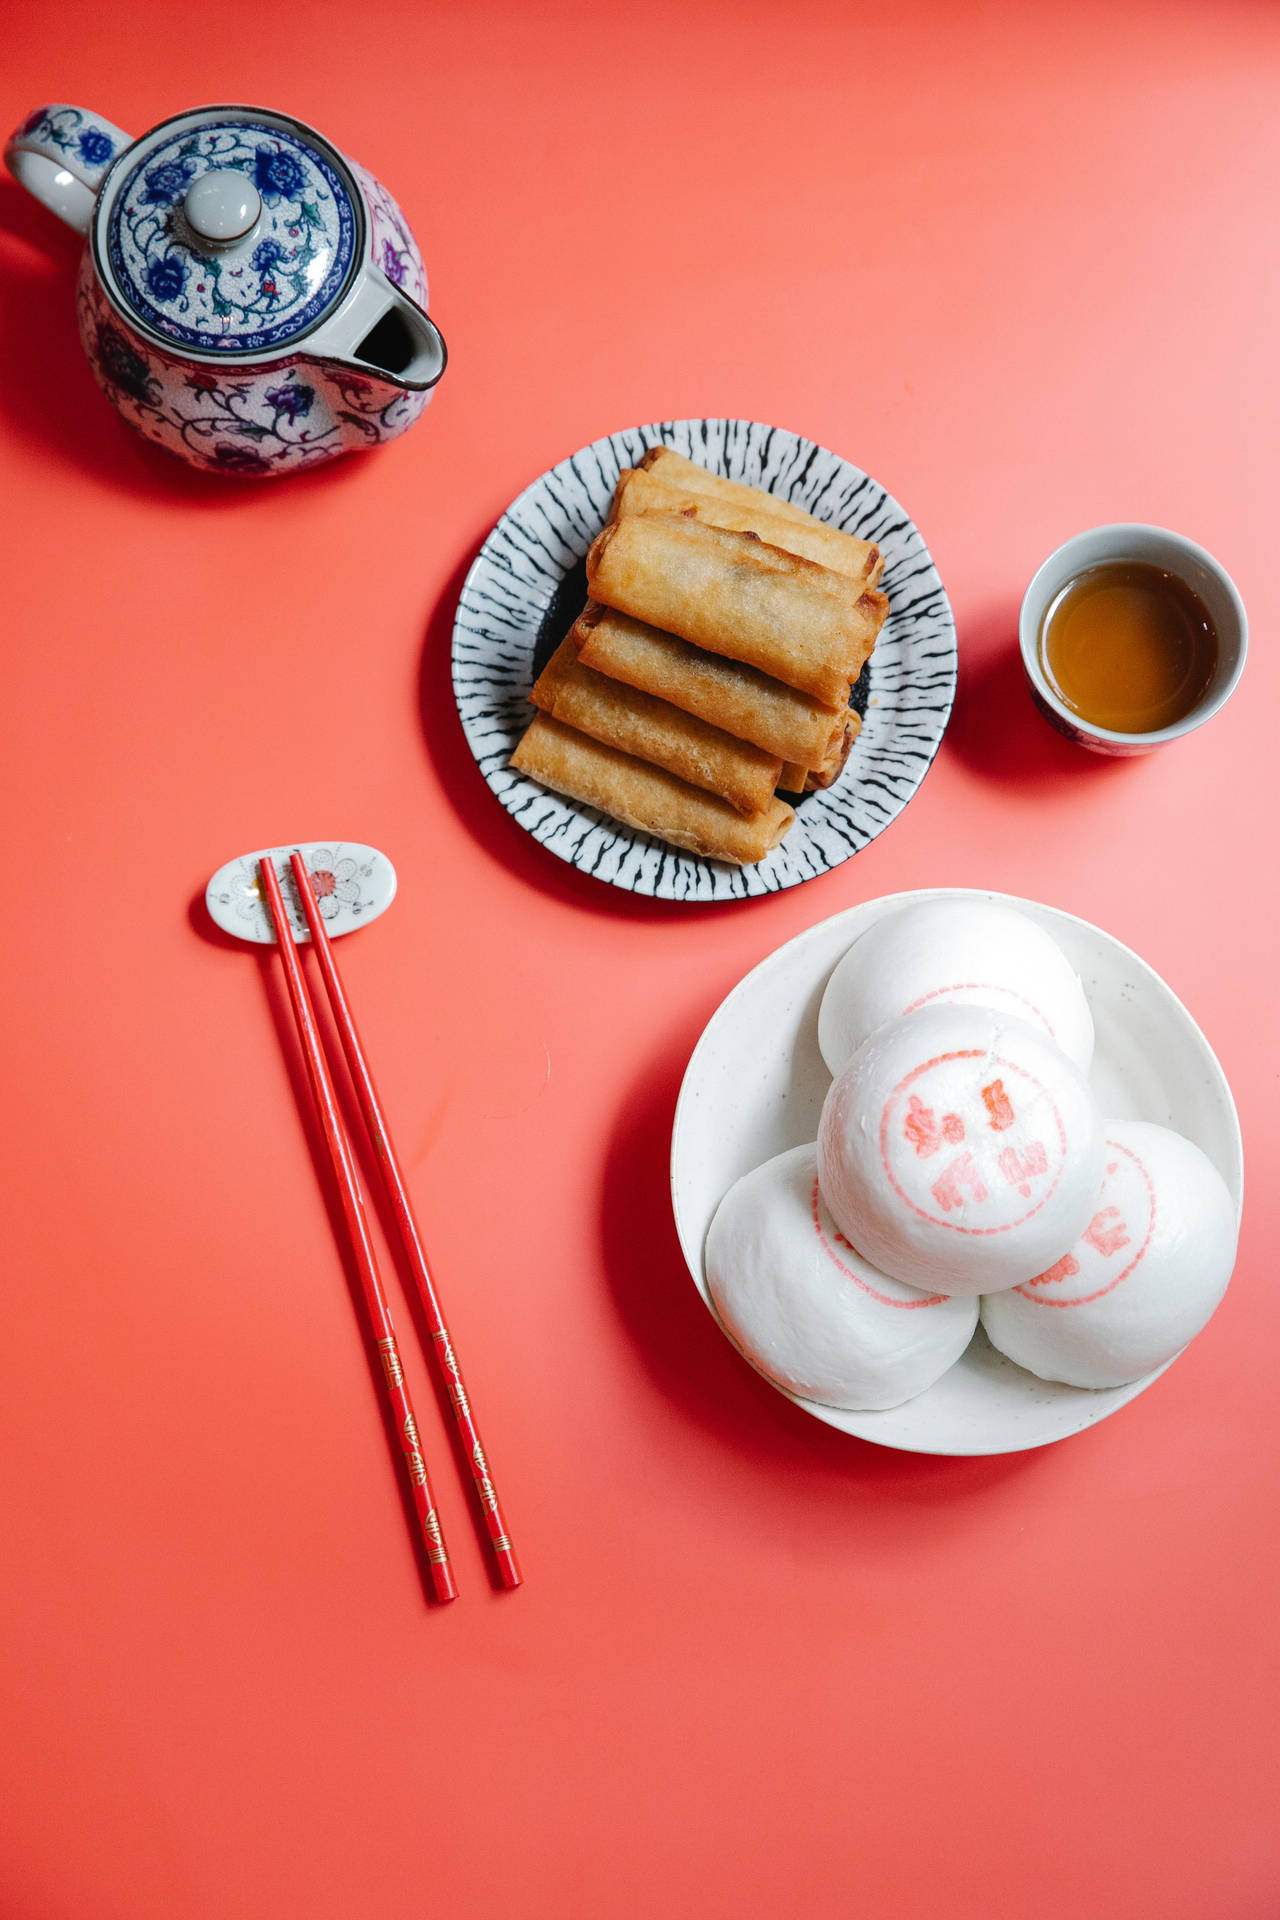 Delicious Egg Roll Paired With Sweet Buns